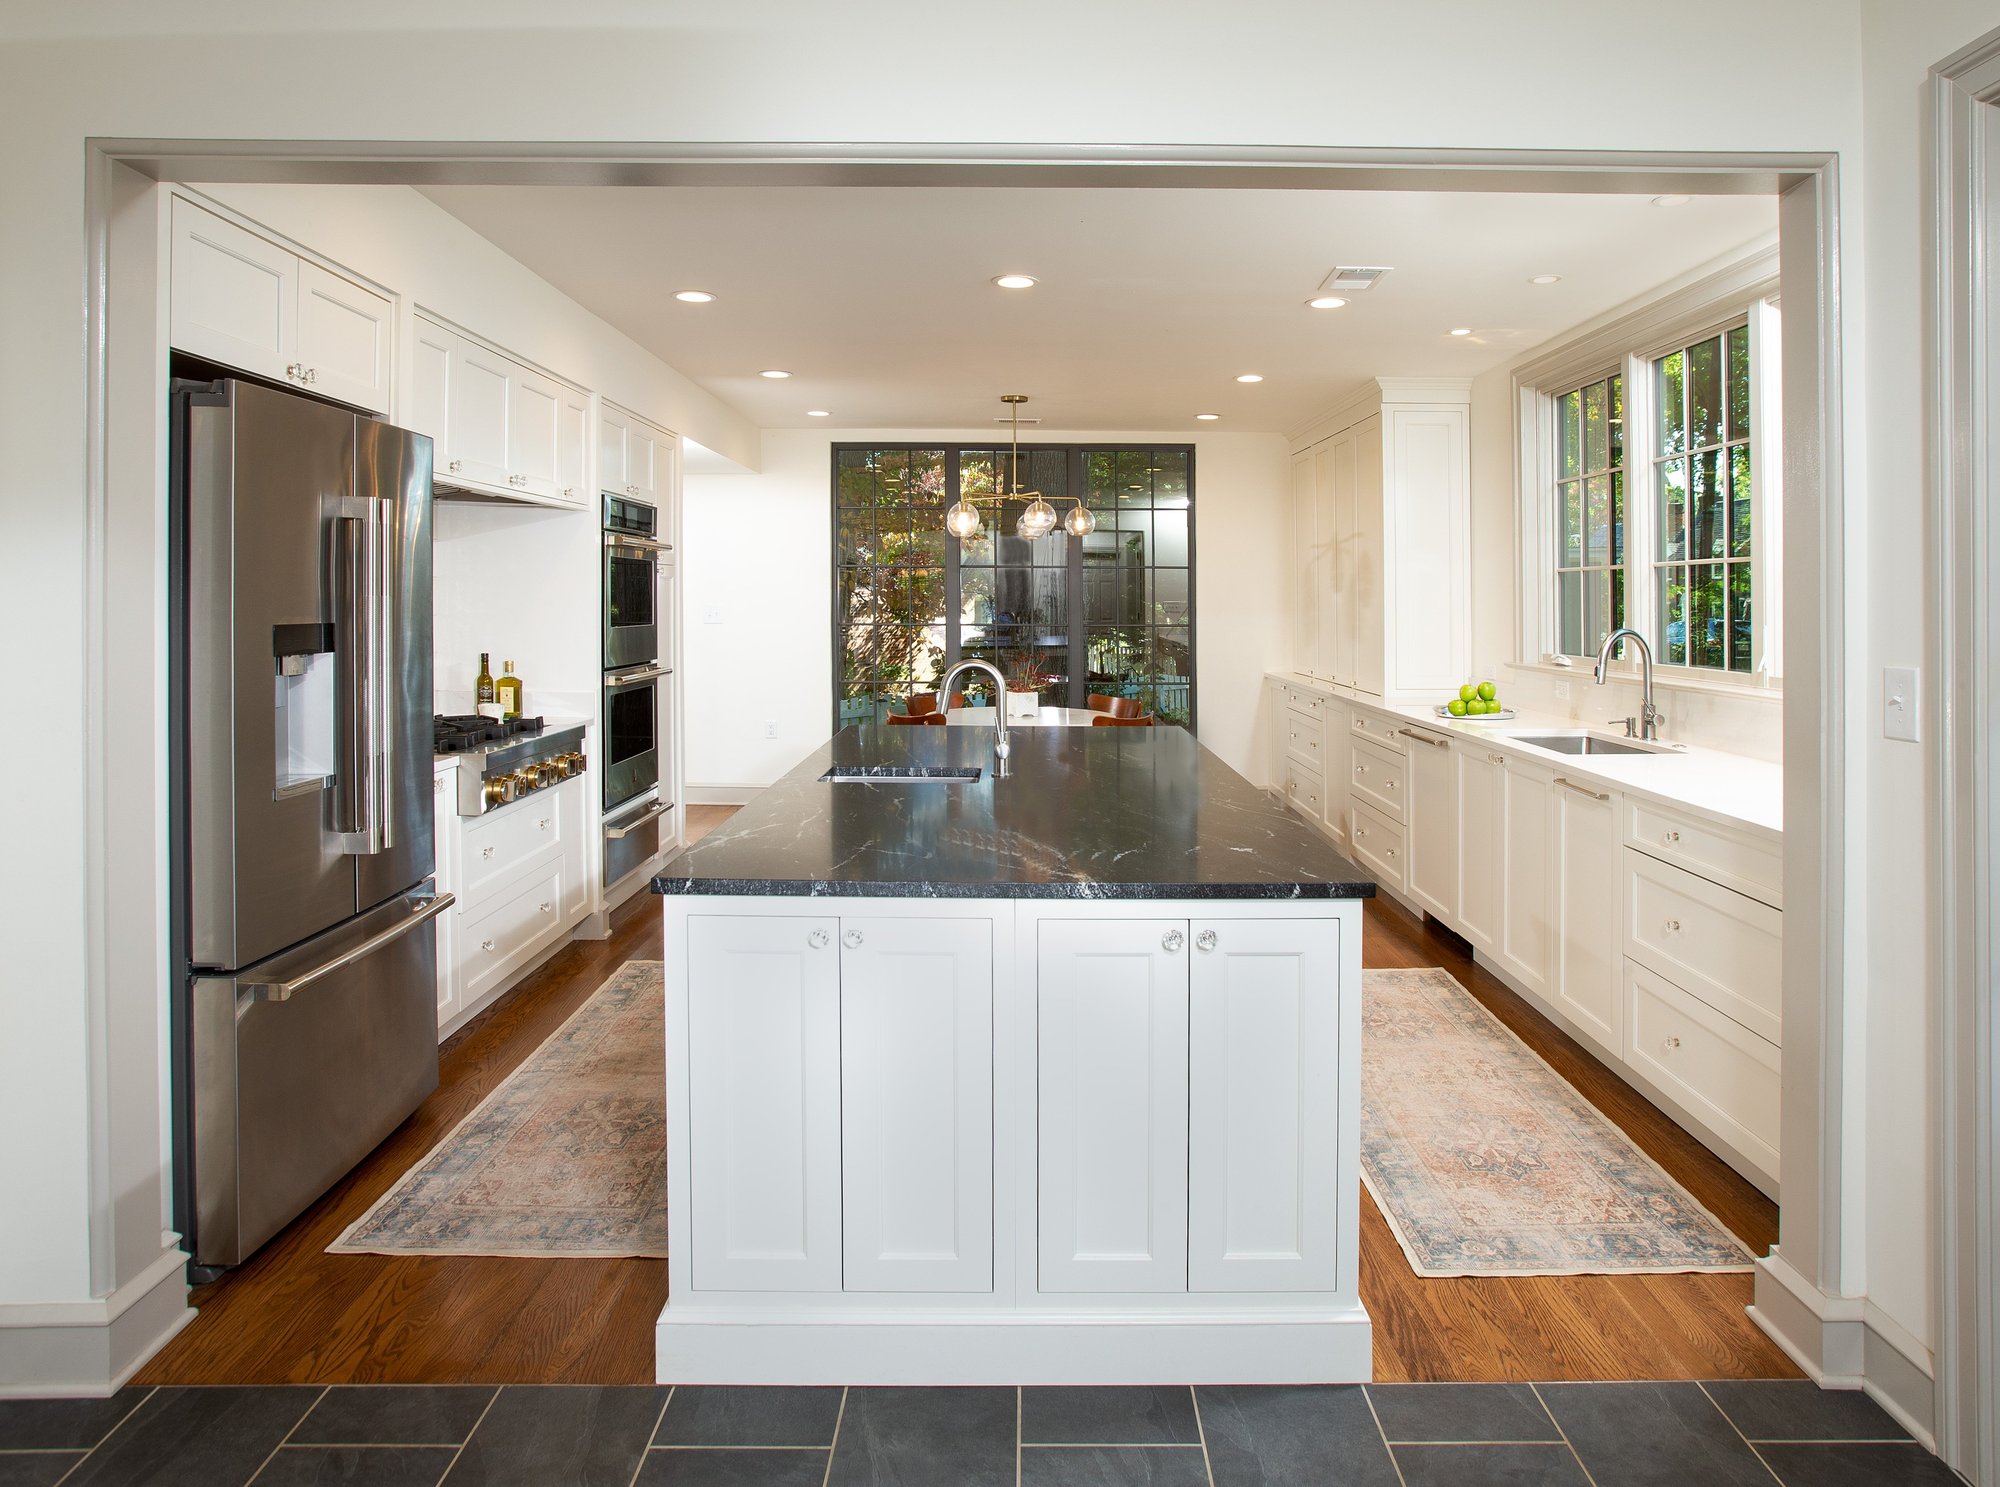 Luxury kitchen remodel with a long kitchen island, black marble countertops, and white storage spaces